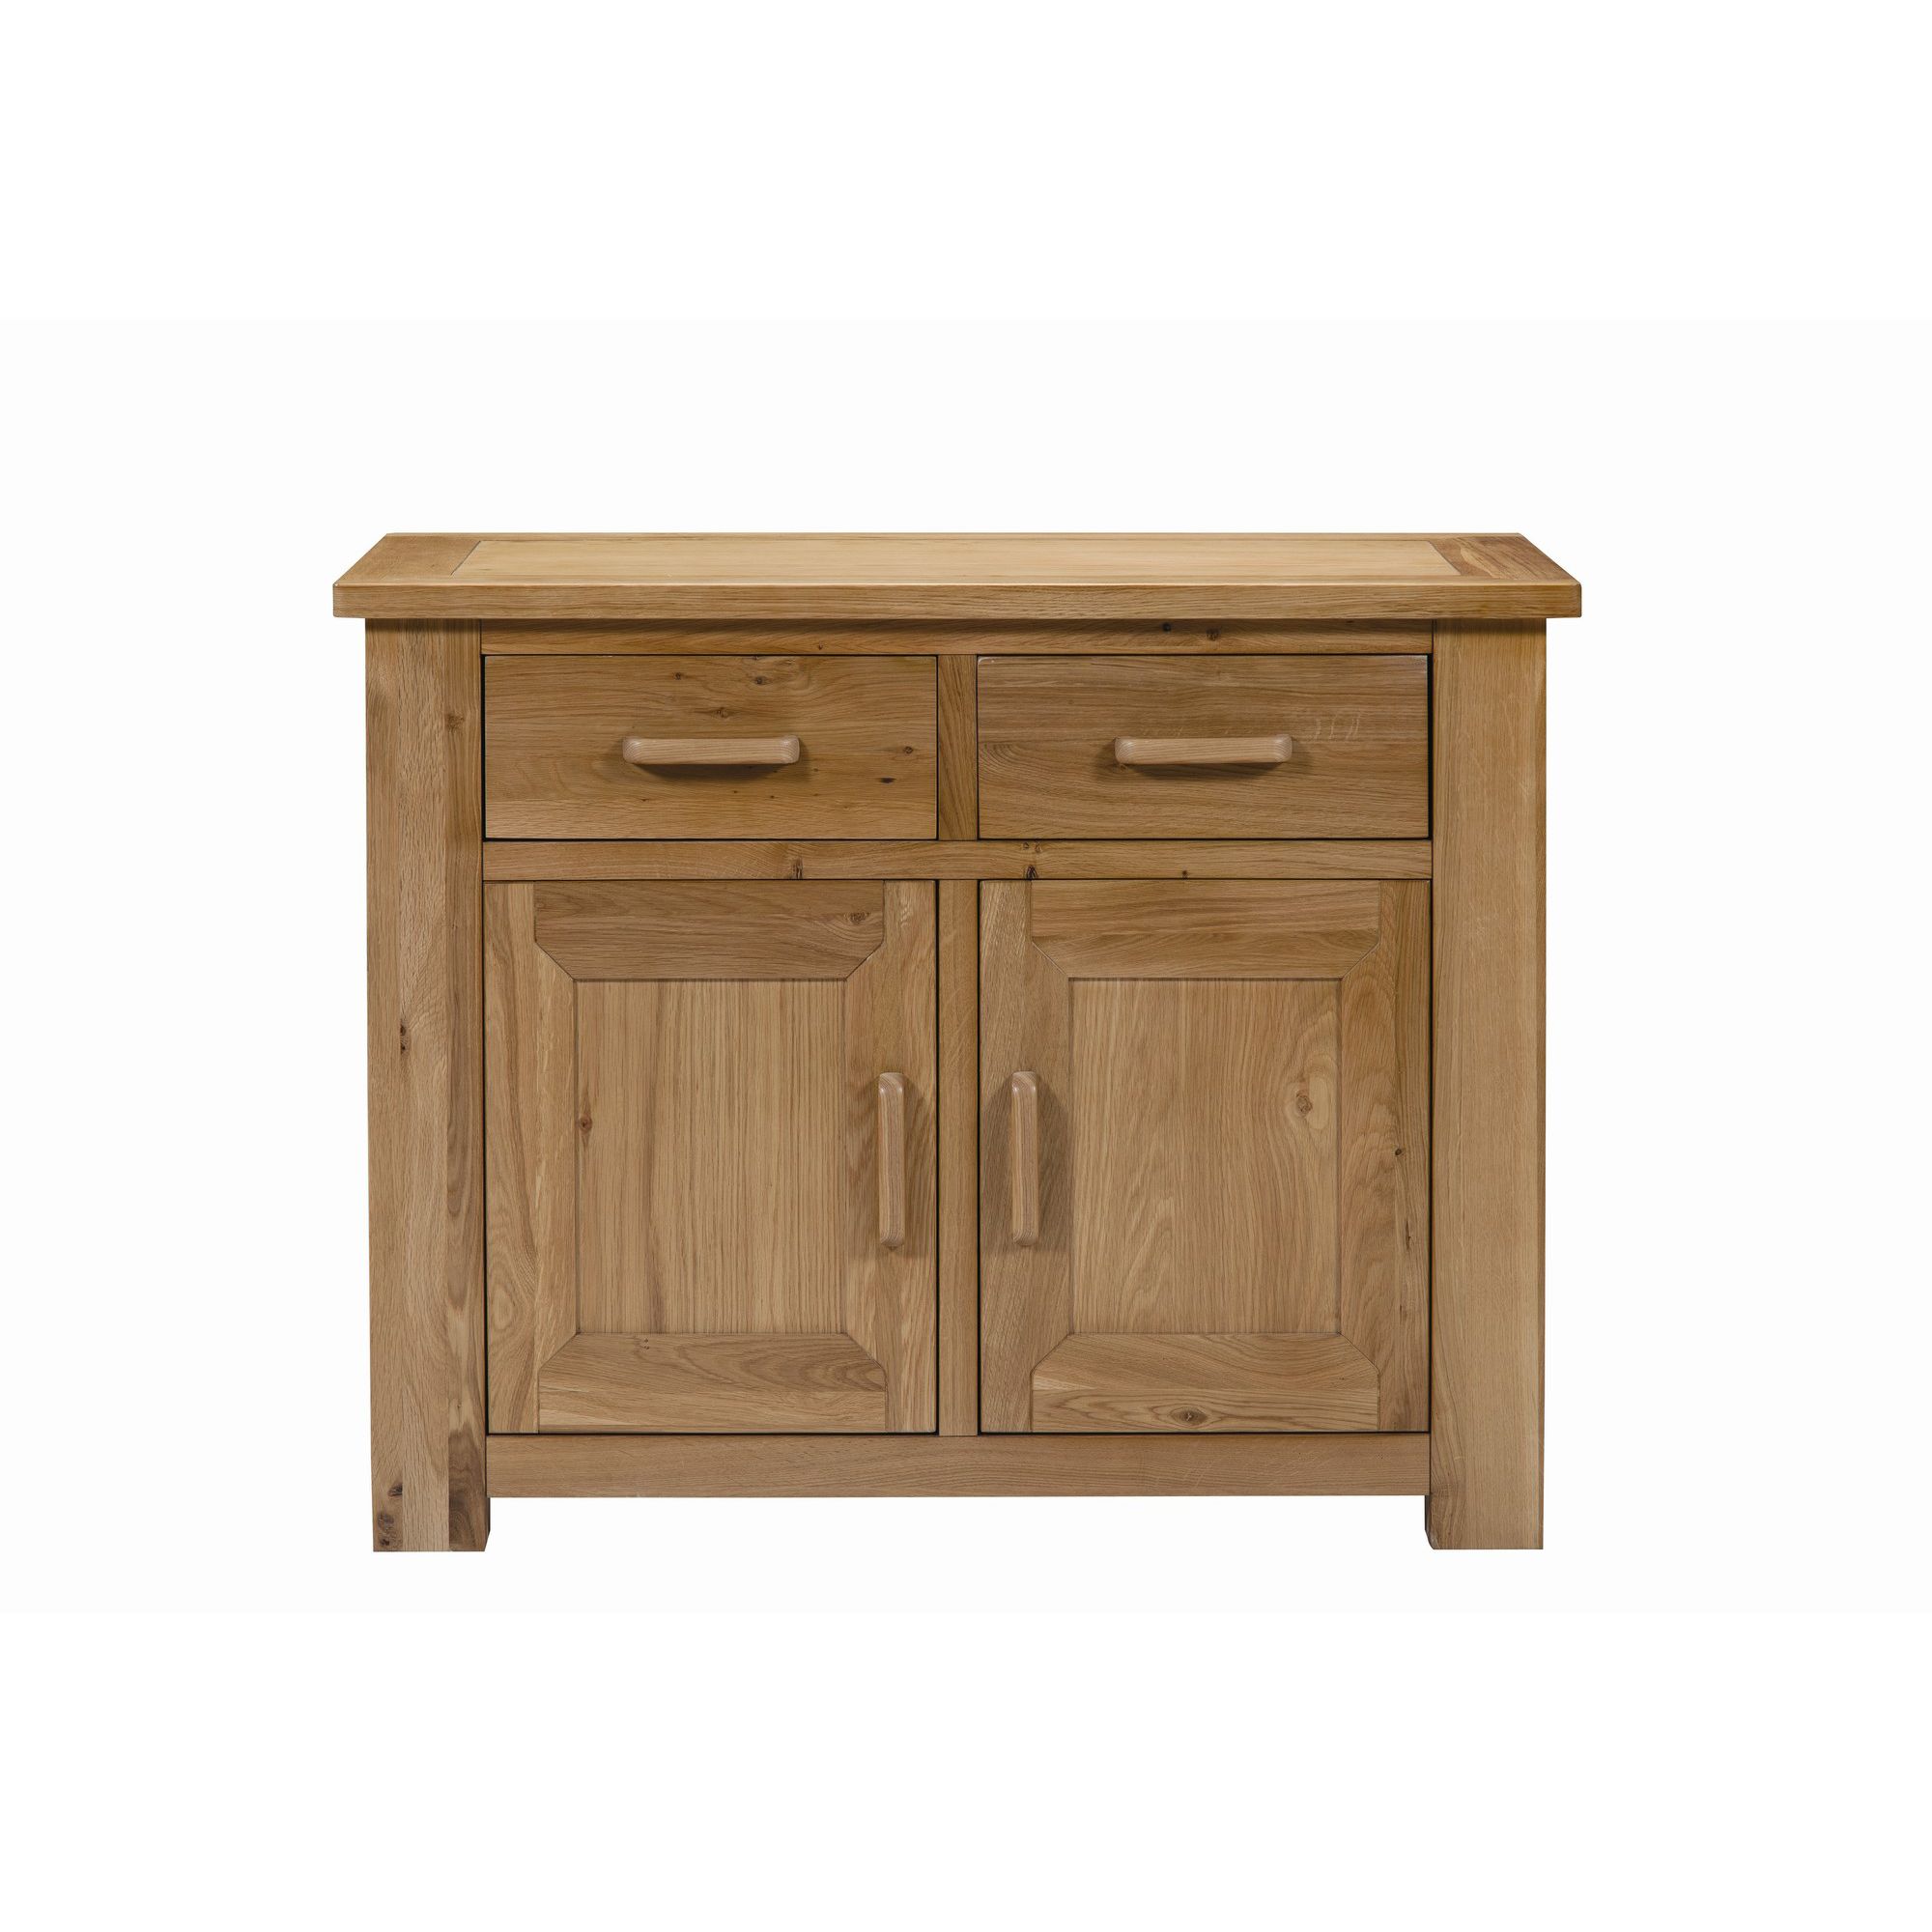 Alterton Furniture Wiltshire Small Sideboard at Tesco Direct